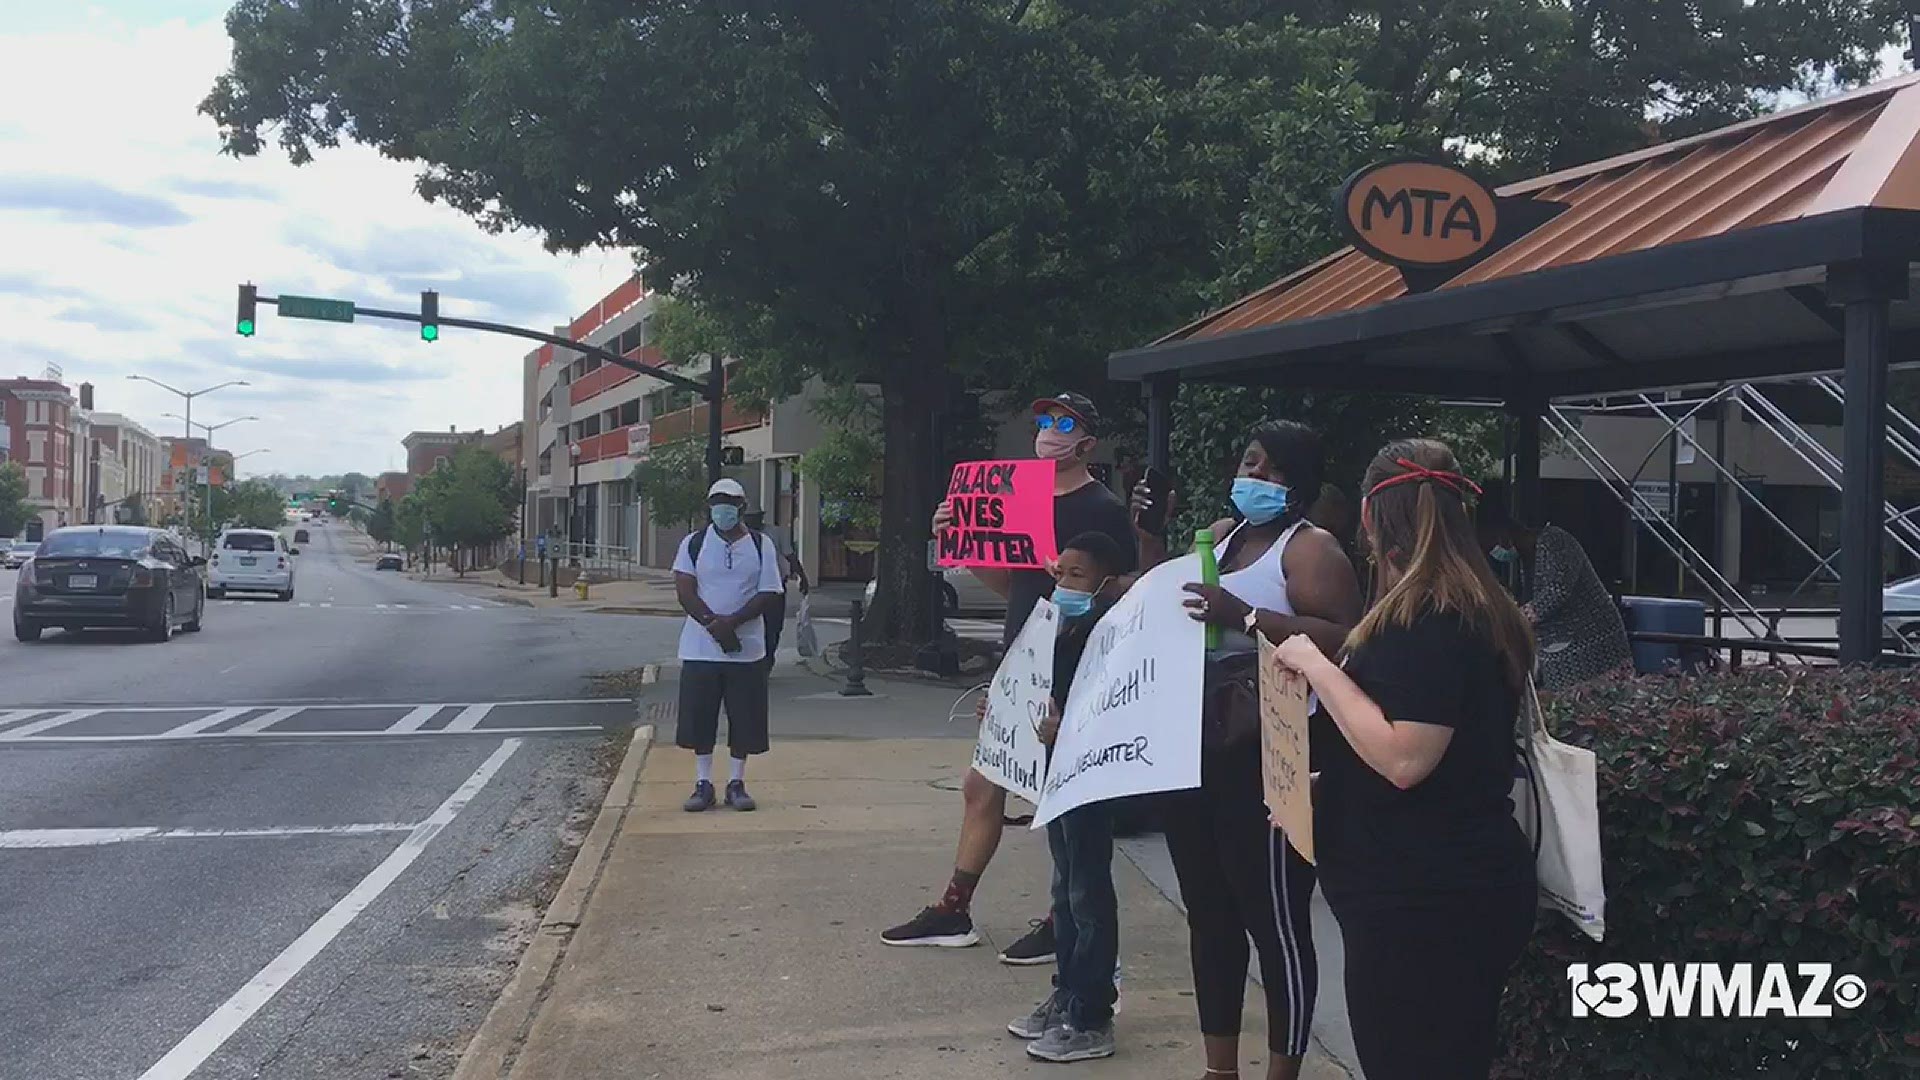 Protestors stood in front of the Douglass Theatre encouraging passing drivers to honk if they could not stand out with them.